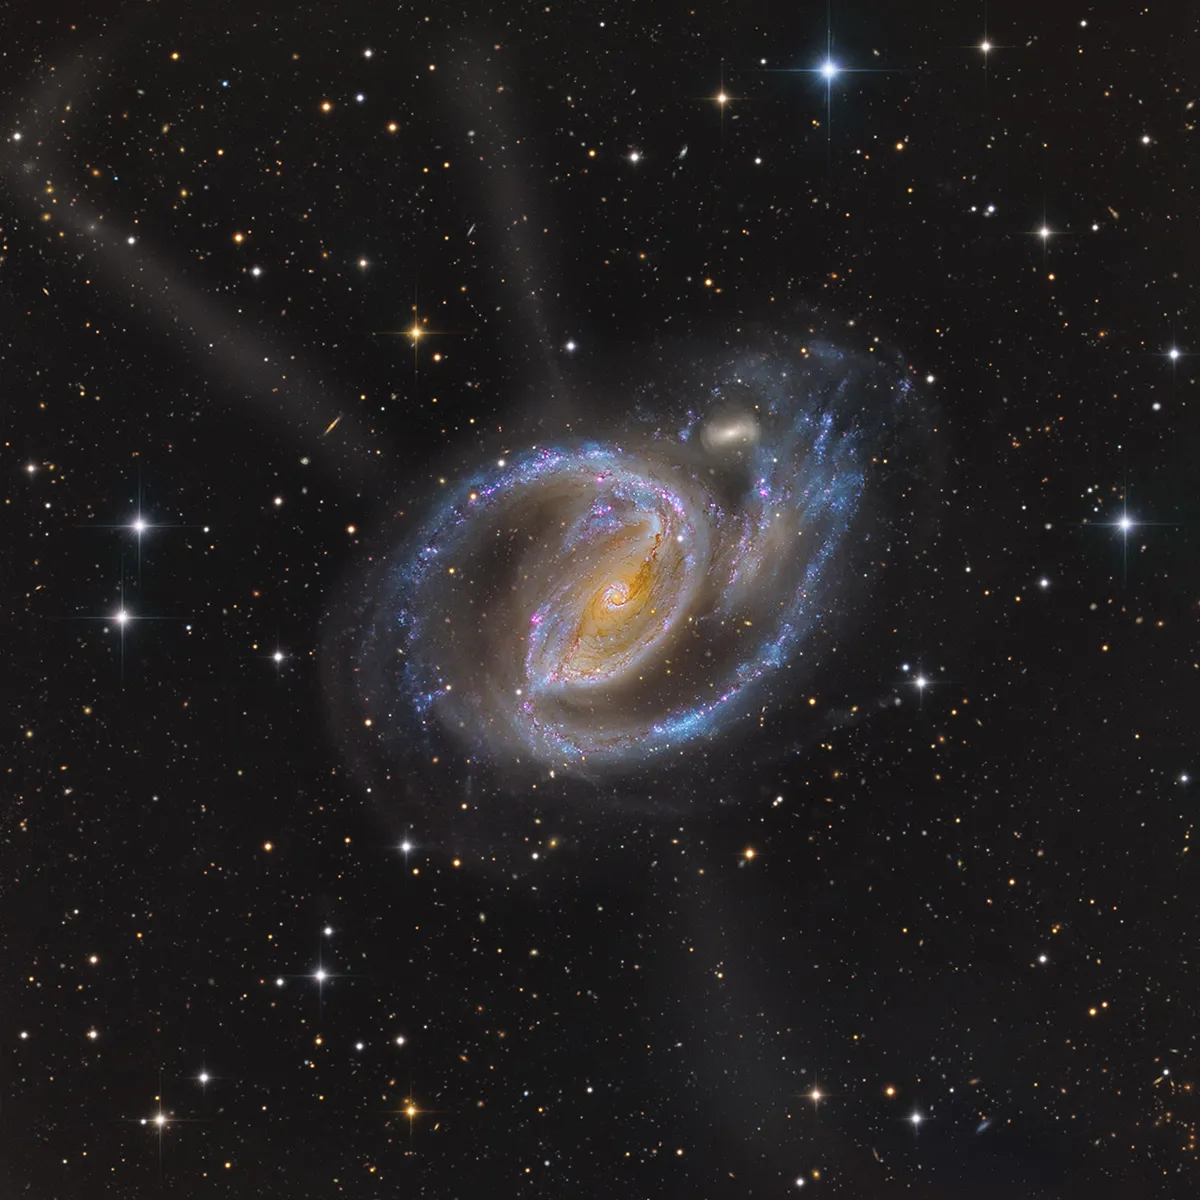 NGC 1097 and Tidal Tails, by Mark Hanson; Mike Selby, El Sauce Observatory, Río Hurtado, Chile Category: Galaxies Equipment: Planewave CDK 1000 and CDK 700 telescopes, Chroma filters, FLI 16803 and QHY461 cameras, 6,000 mm f/6 and 4550 mm f/6.5, multiple 900-second Luminance exposures (12 hours total exposure), 9-hour H-alpha exposure and 5-hour RGB exposures per filter